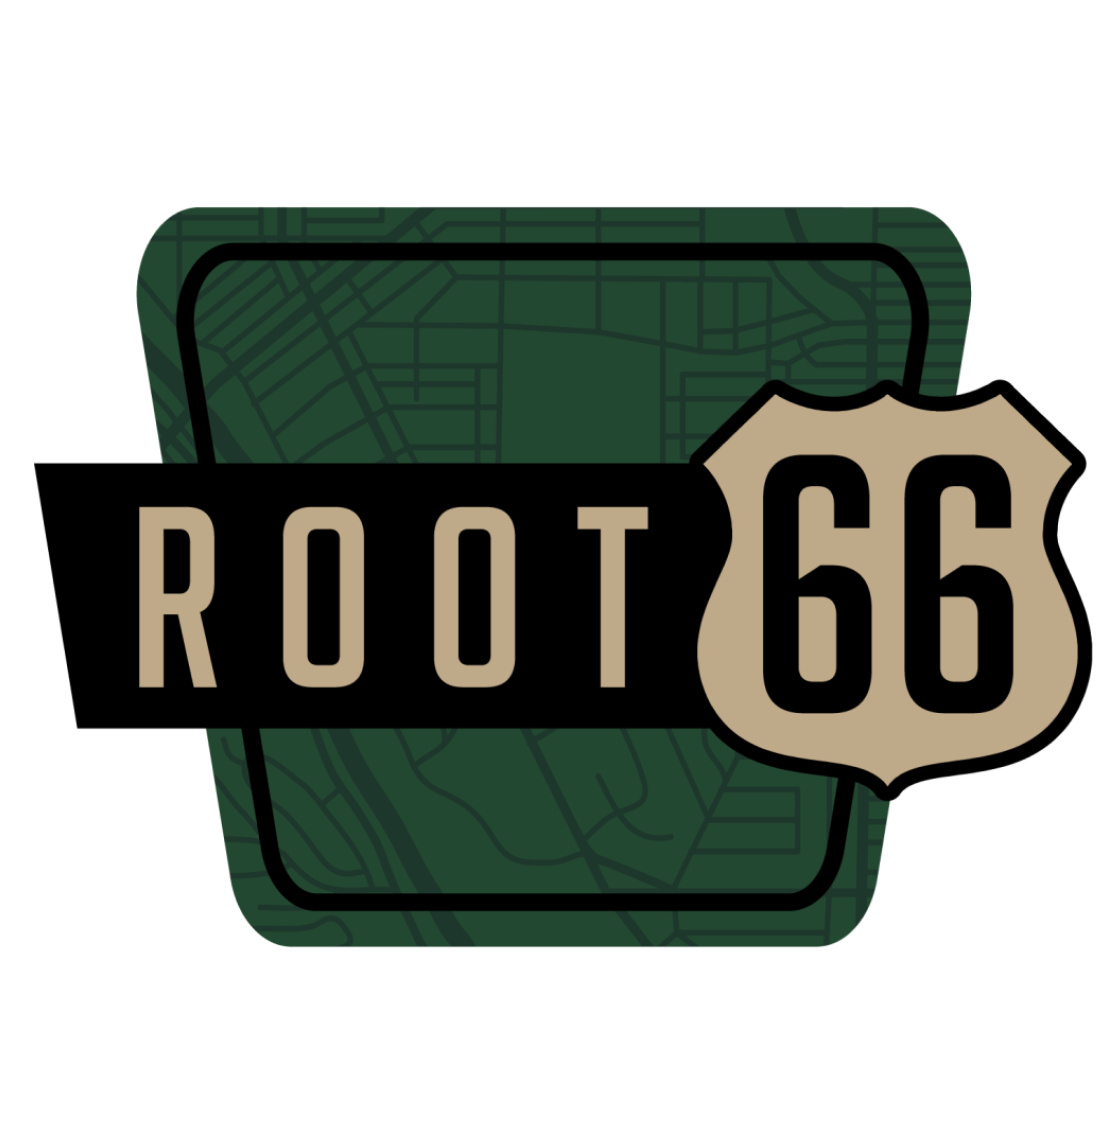 Root 66 St. Peters logo